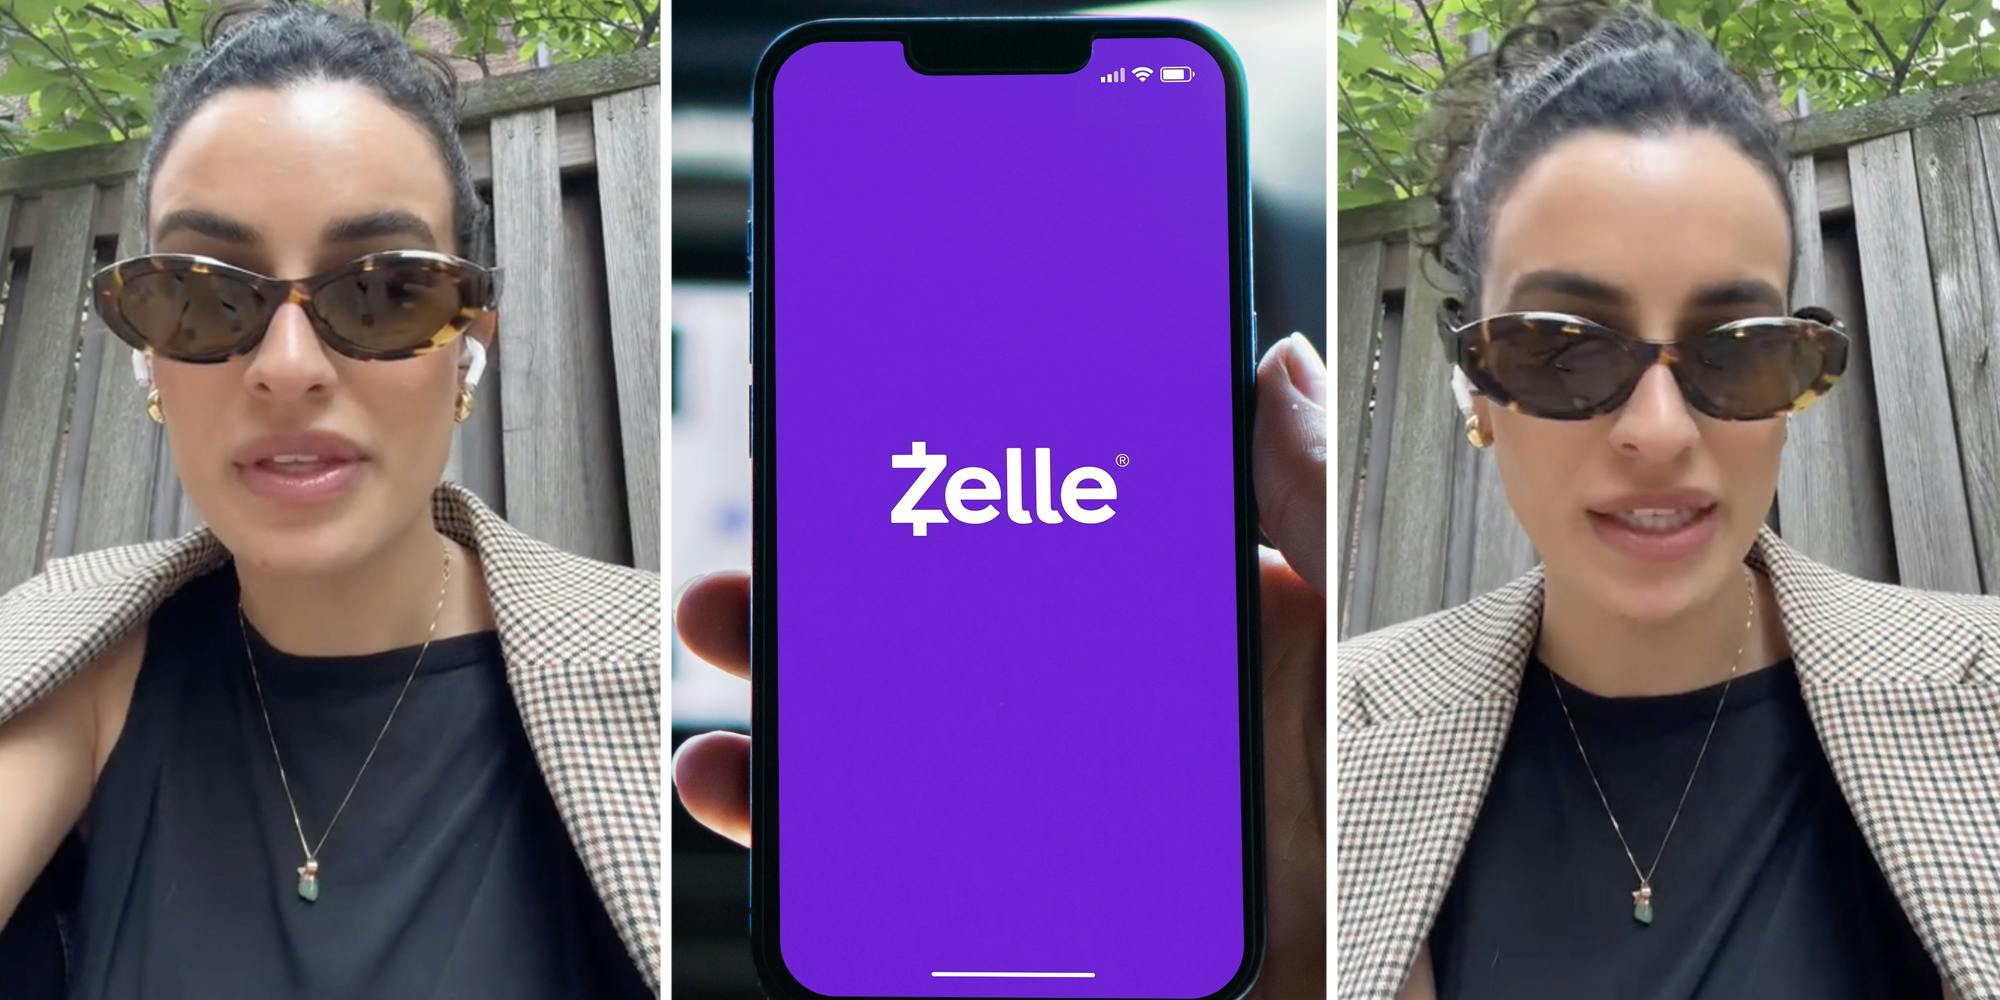 ‘I called my bank and apparently there’s not much that they can do’: Woman scammed out of $2,000 on Zelle by teens who said they were fundraising for basketball uniforms